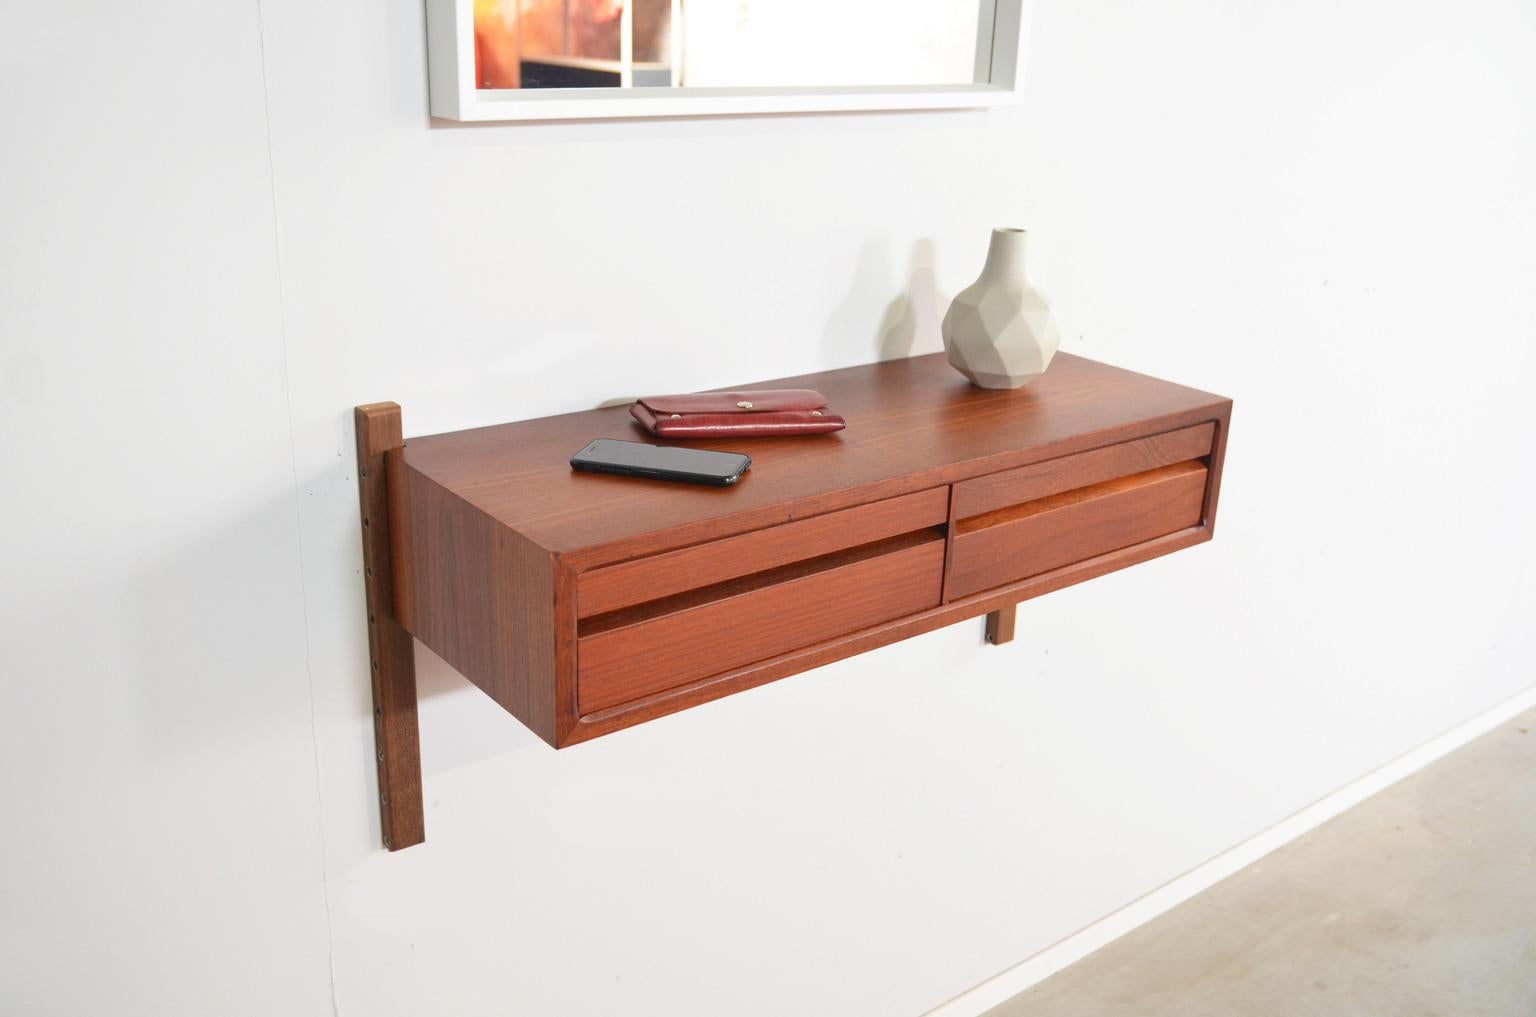 Wall console with two drawers by Poul Cadovius for Royal System, Denmark. The console is made of teak which has gained a beautiful and warm patina during the years.